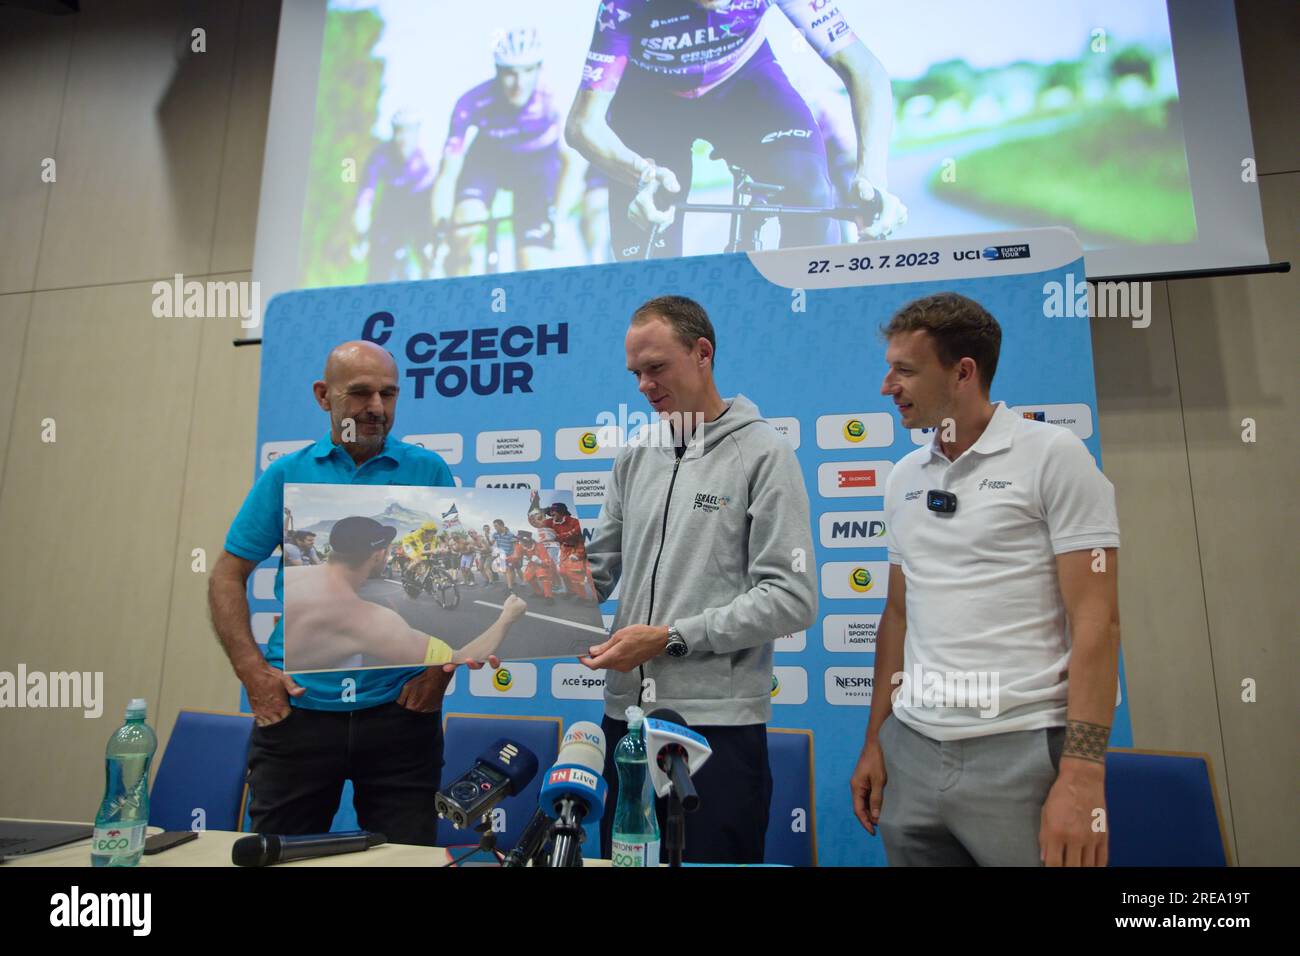 Olomouc, Czech Republic. 26th July, 2023. Czech Tour star Chris Froome (centre), race president Robert Kolar (left) and race director Leopold Konig at a pre-race press conference at the Clarion Congress Hotel in Olomouc, 26 July 2023. Pictured here, Chris Froome takes over his famous time trial photo taken by photographer Marketa Navratilova. Credit: Stanislav Helona/CTK Photo/Alamy Live News Stock Photo